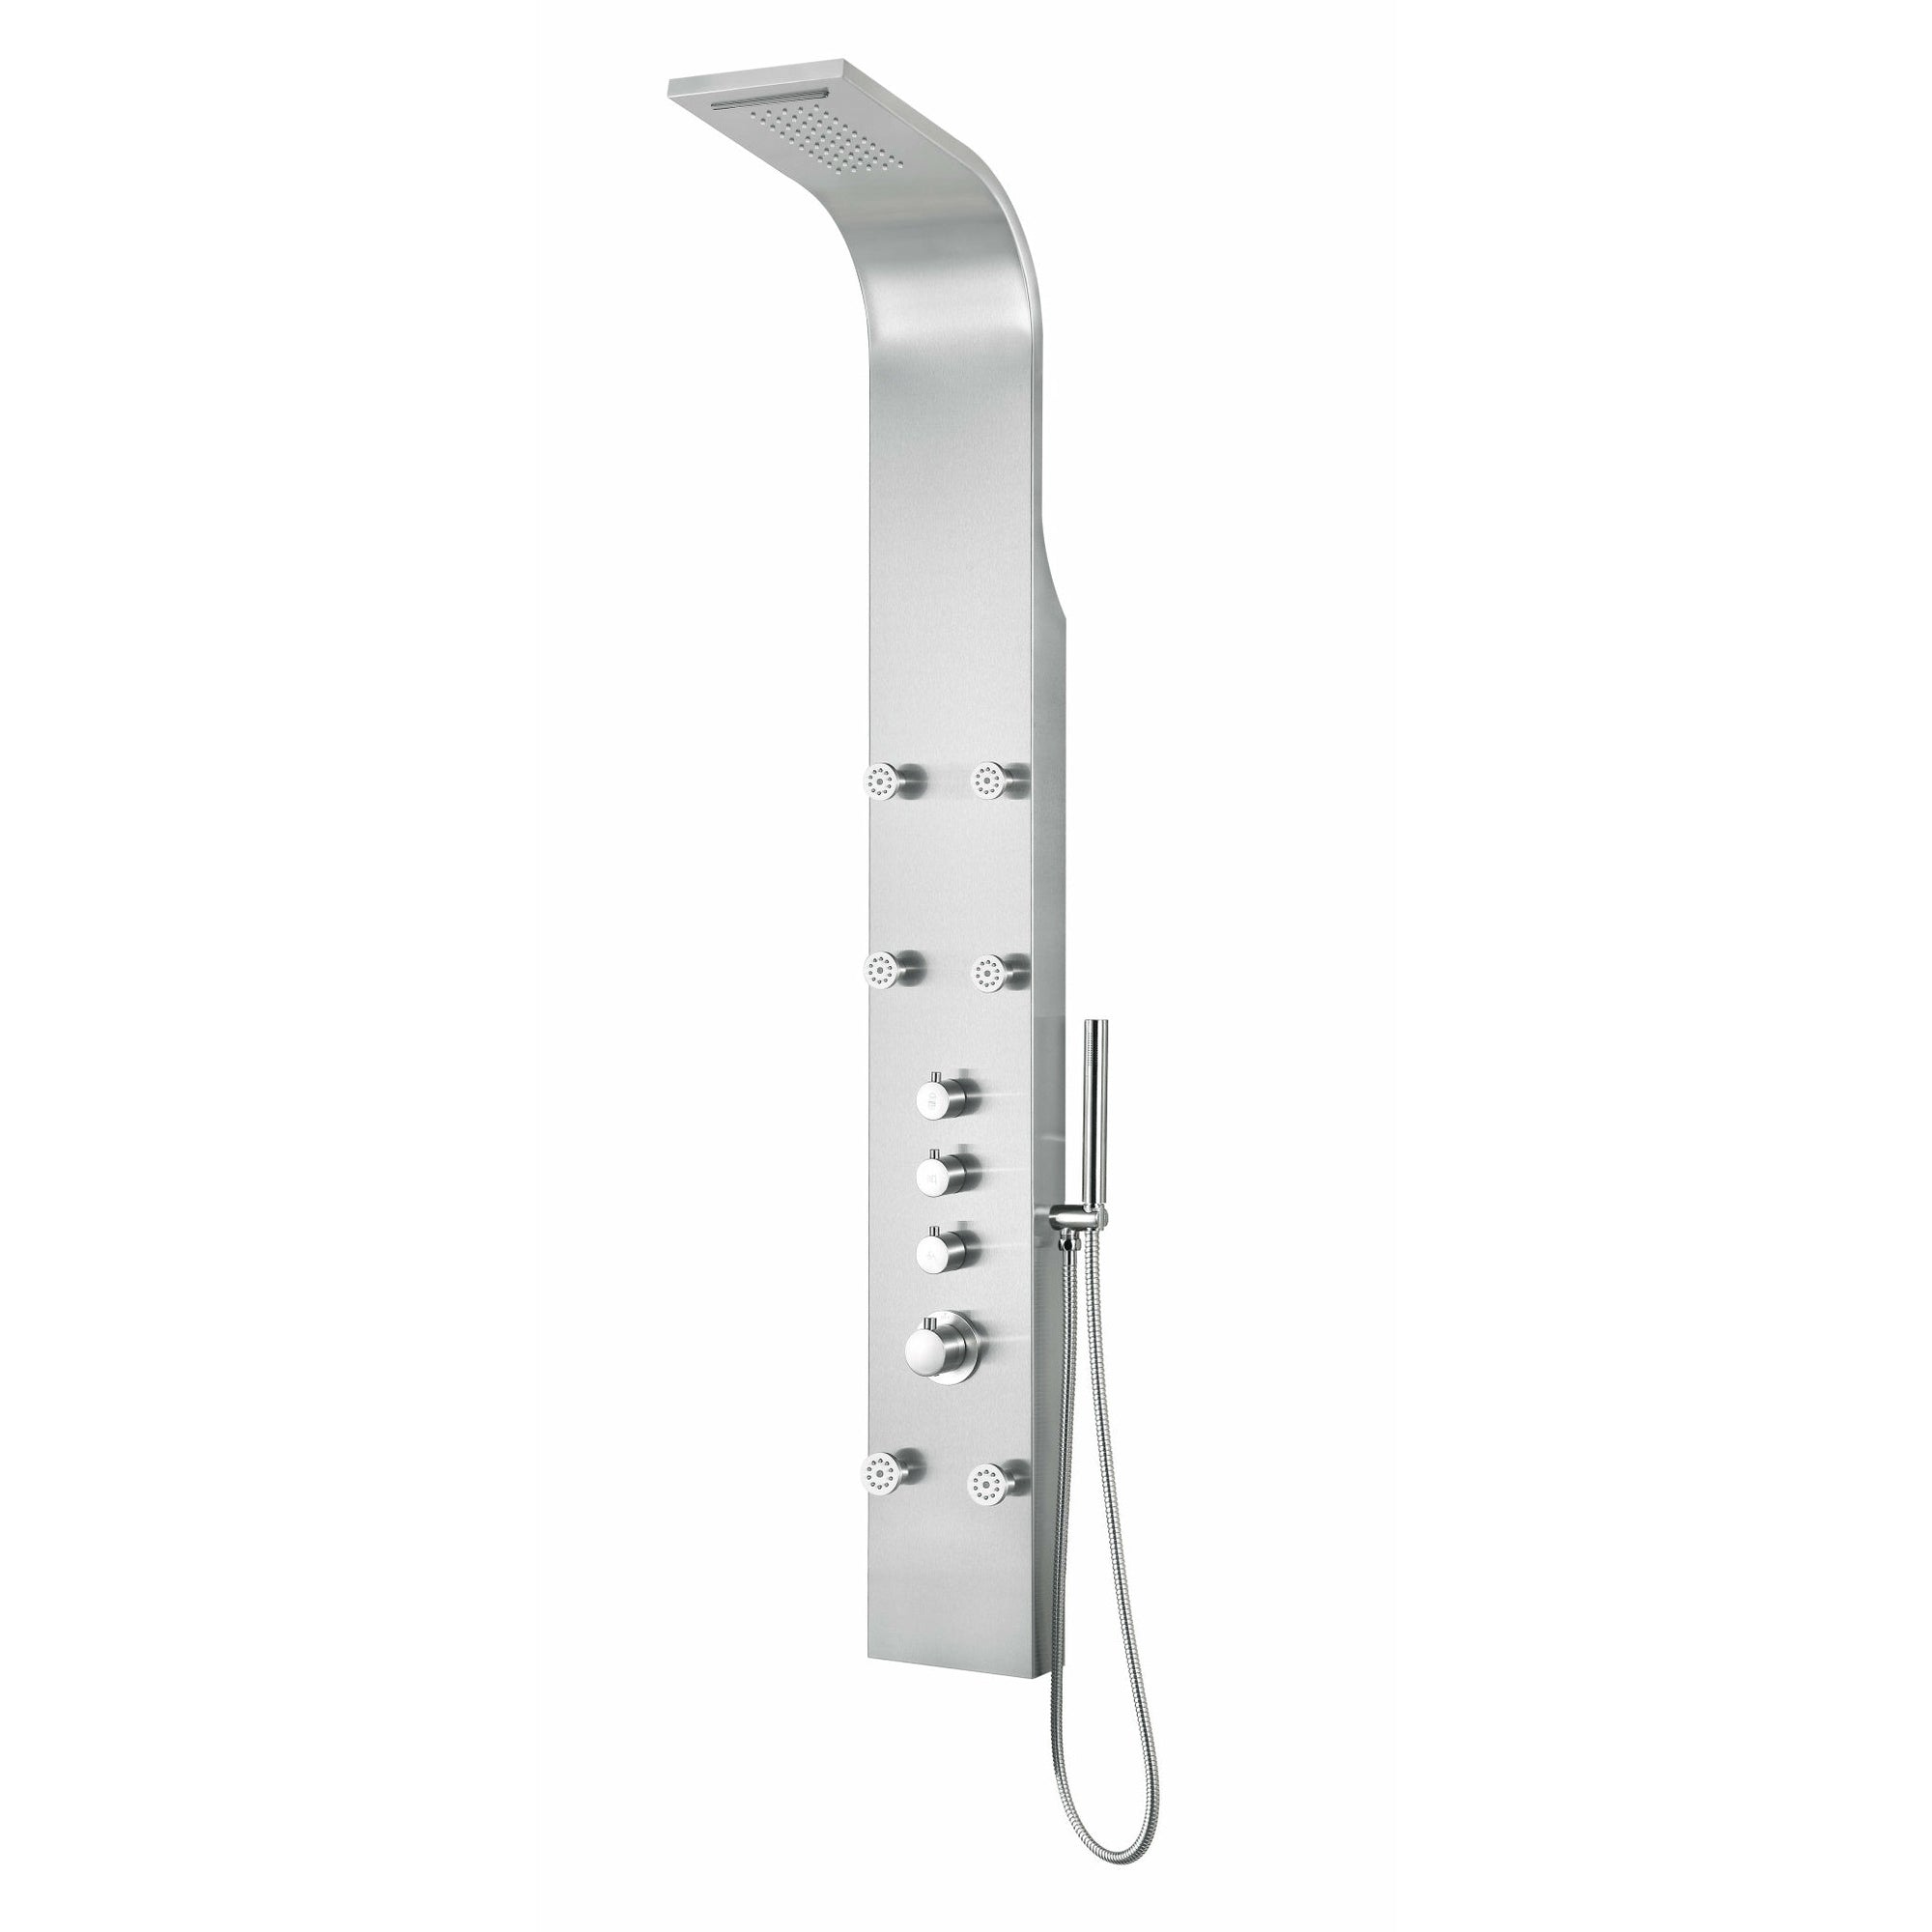 Anzzi Fontan 64 in. Six Directional Acu-stream Body Jets Shower Panel with Fixed Overhead Waterfall Shower Head, Four Shower Control Knobs and Euro-grip Handheld Sprayer SP-AZ026 - Vital Hydrotherapy